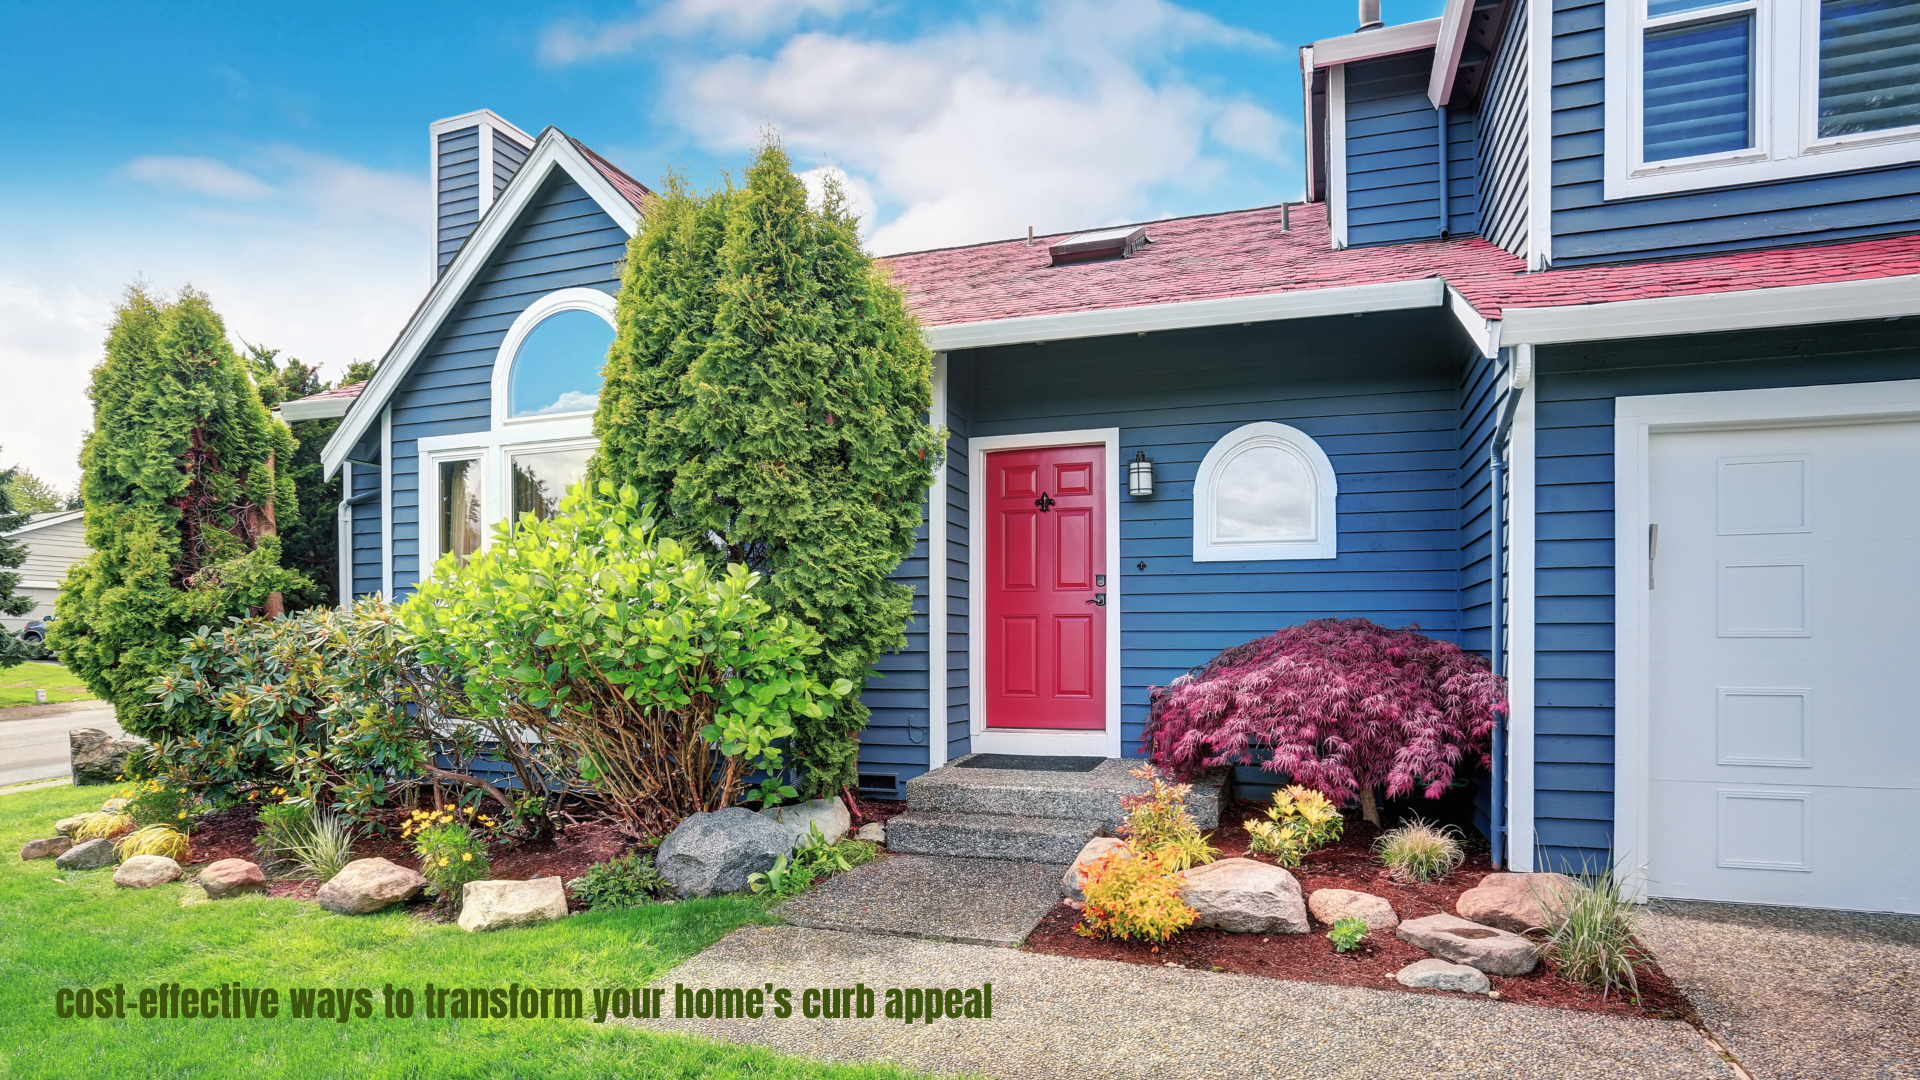 Cost-effective strategies to transform home's curb appeal